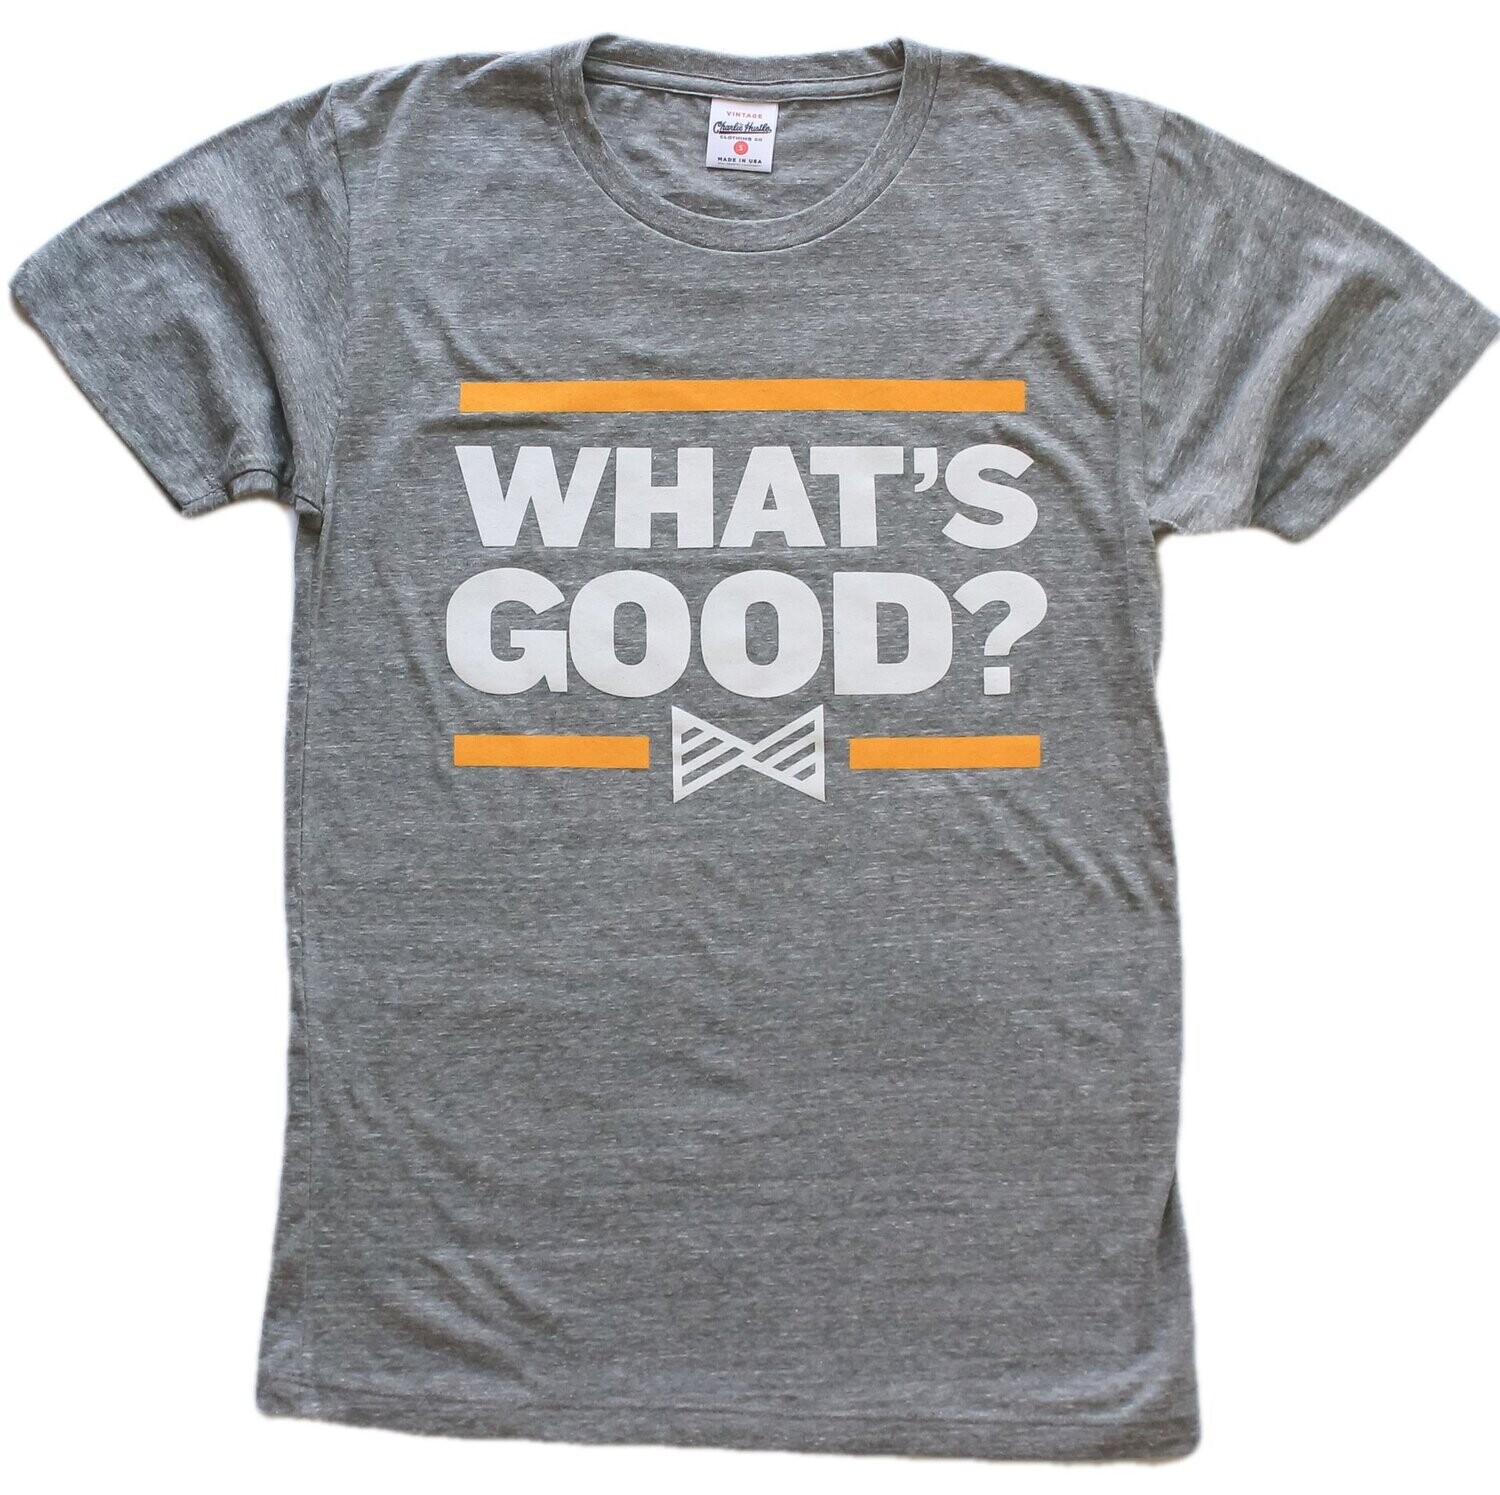 What's GOOD? Official Brand Shirt (Traditional Grey)